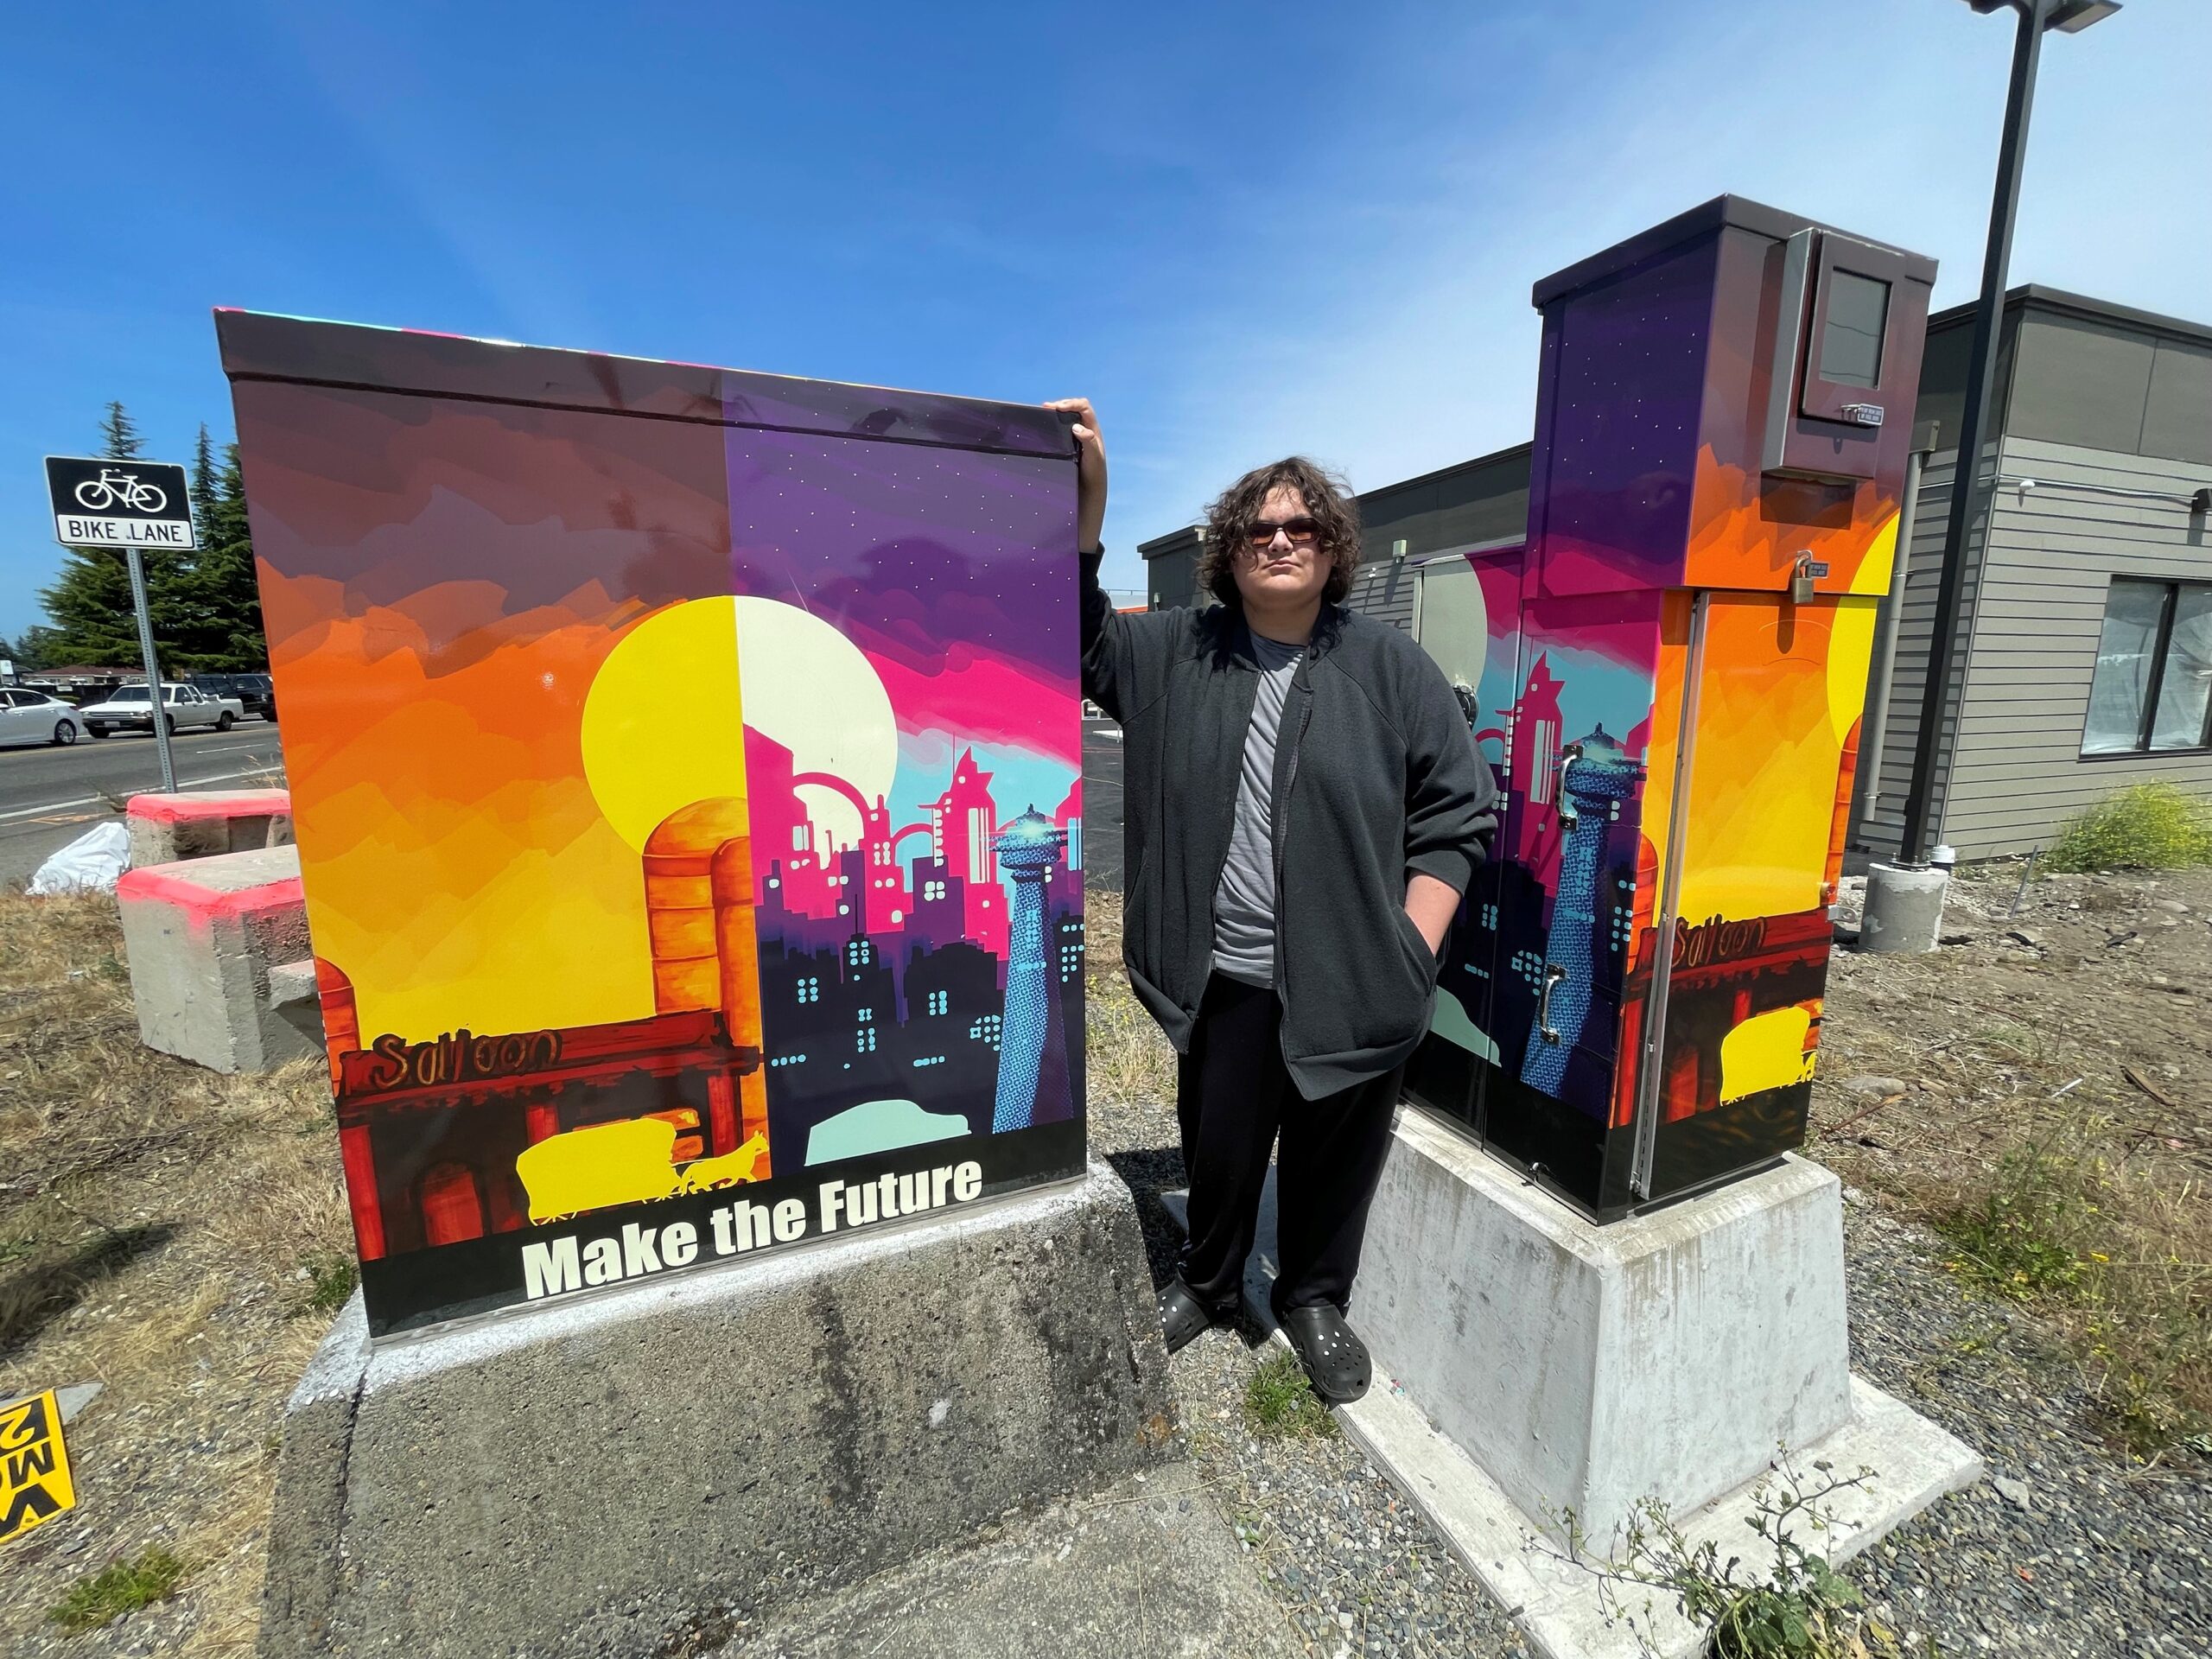 Lakewood high school student Sam Reed poses next to the two signal boxes that hold his artistic design in Lakewood at the corner of 96th Street SW and South Tacoma Way SW.